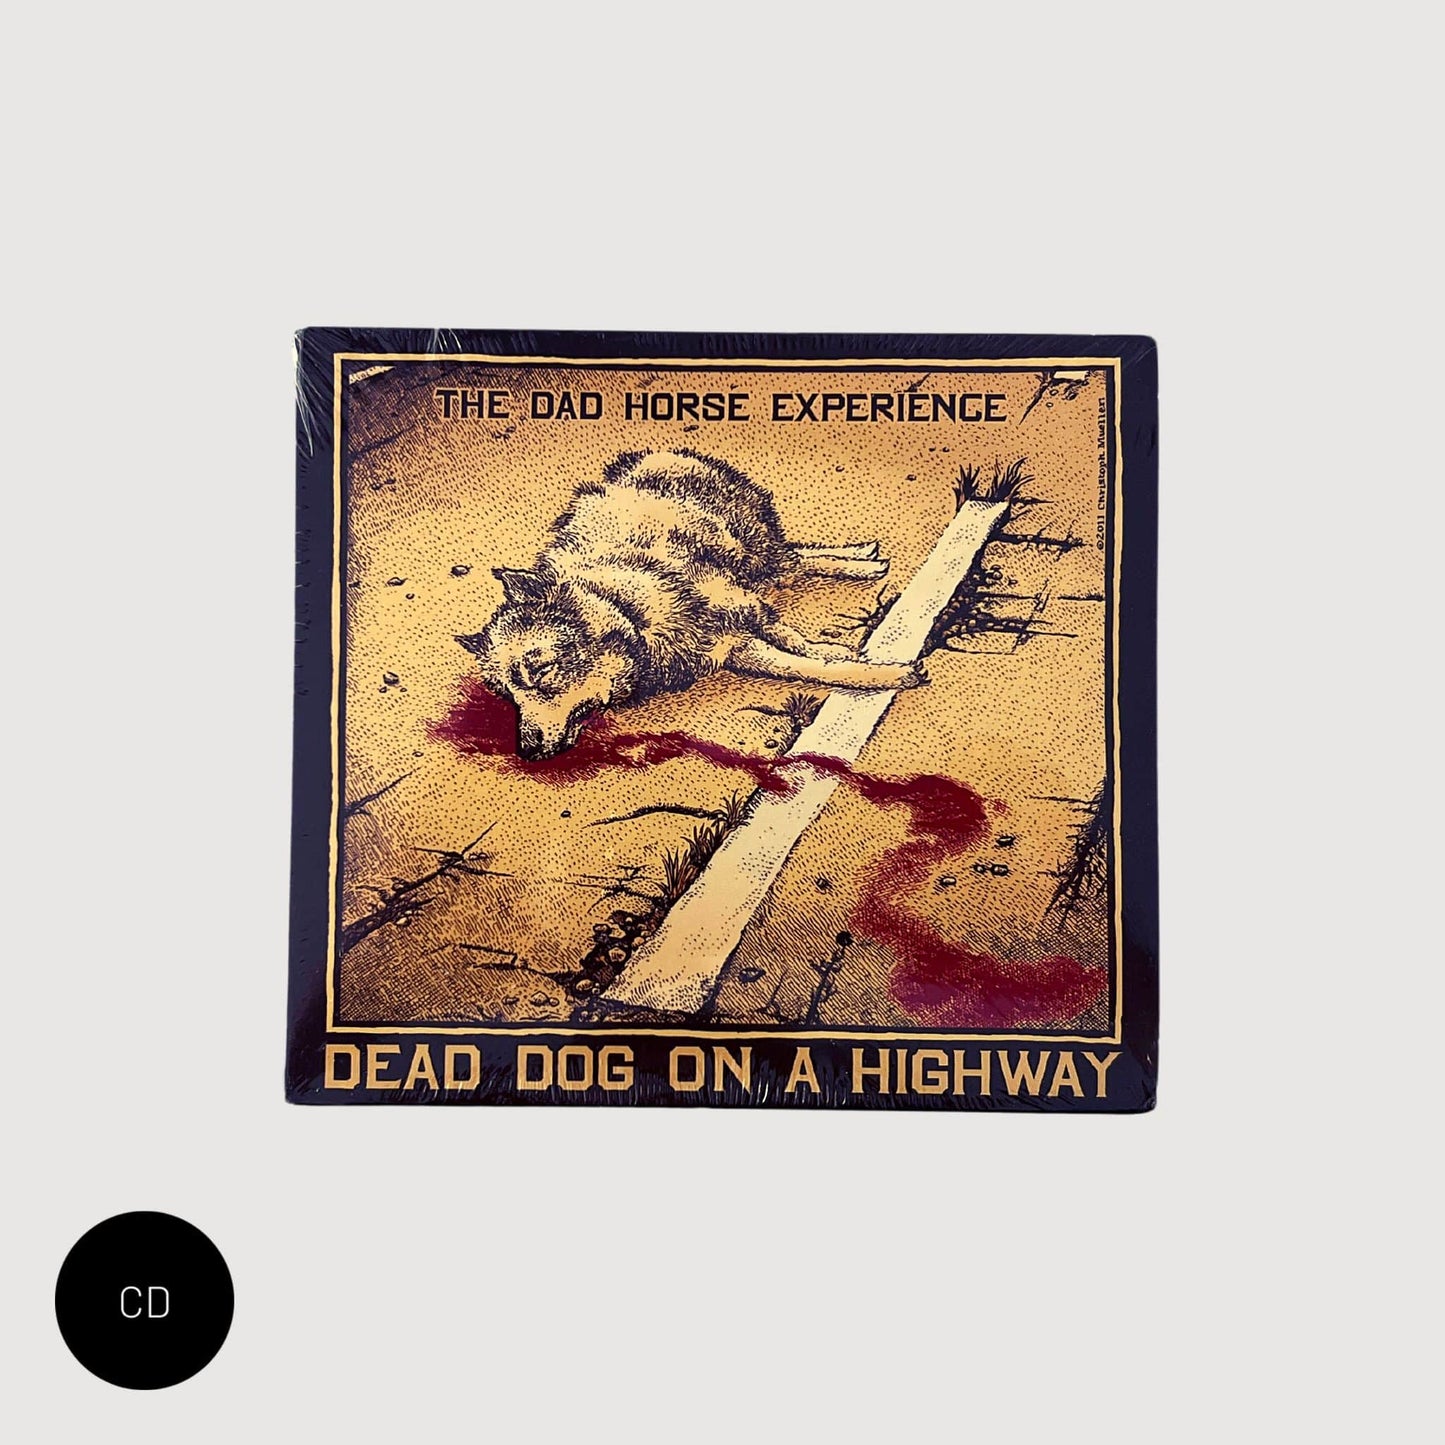 The Dad Horse Experience: Dead Dog On A Highway CD